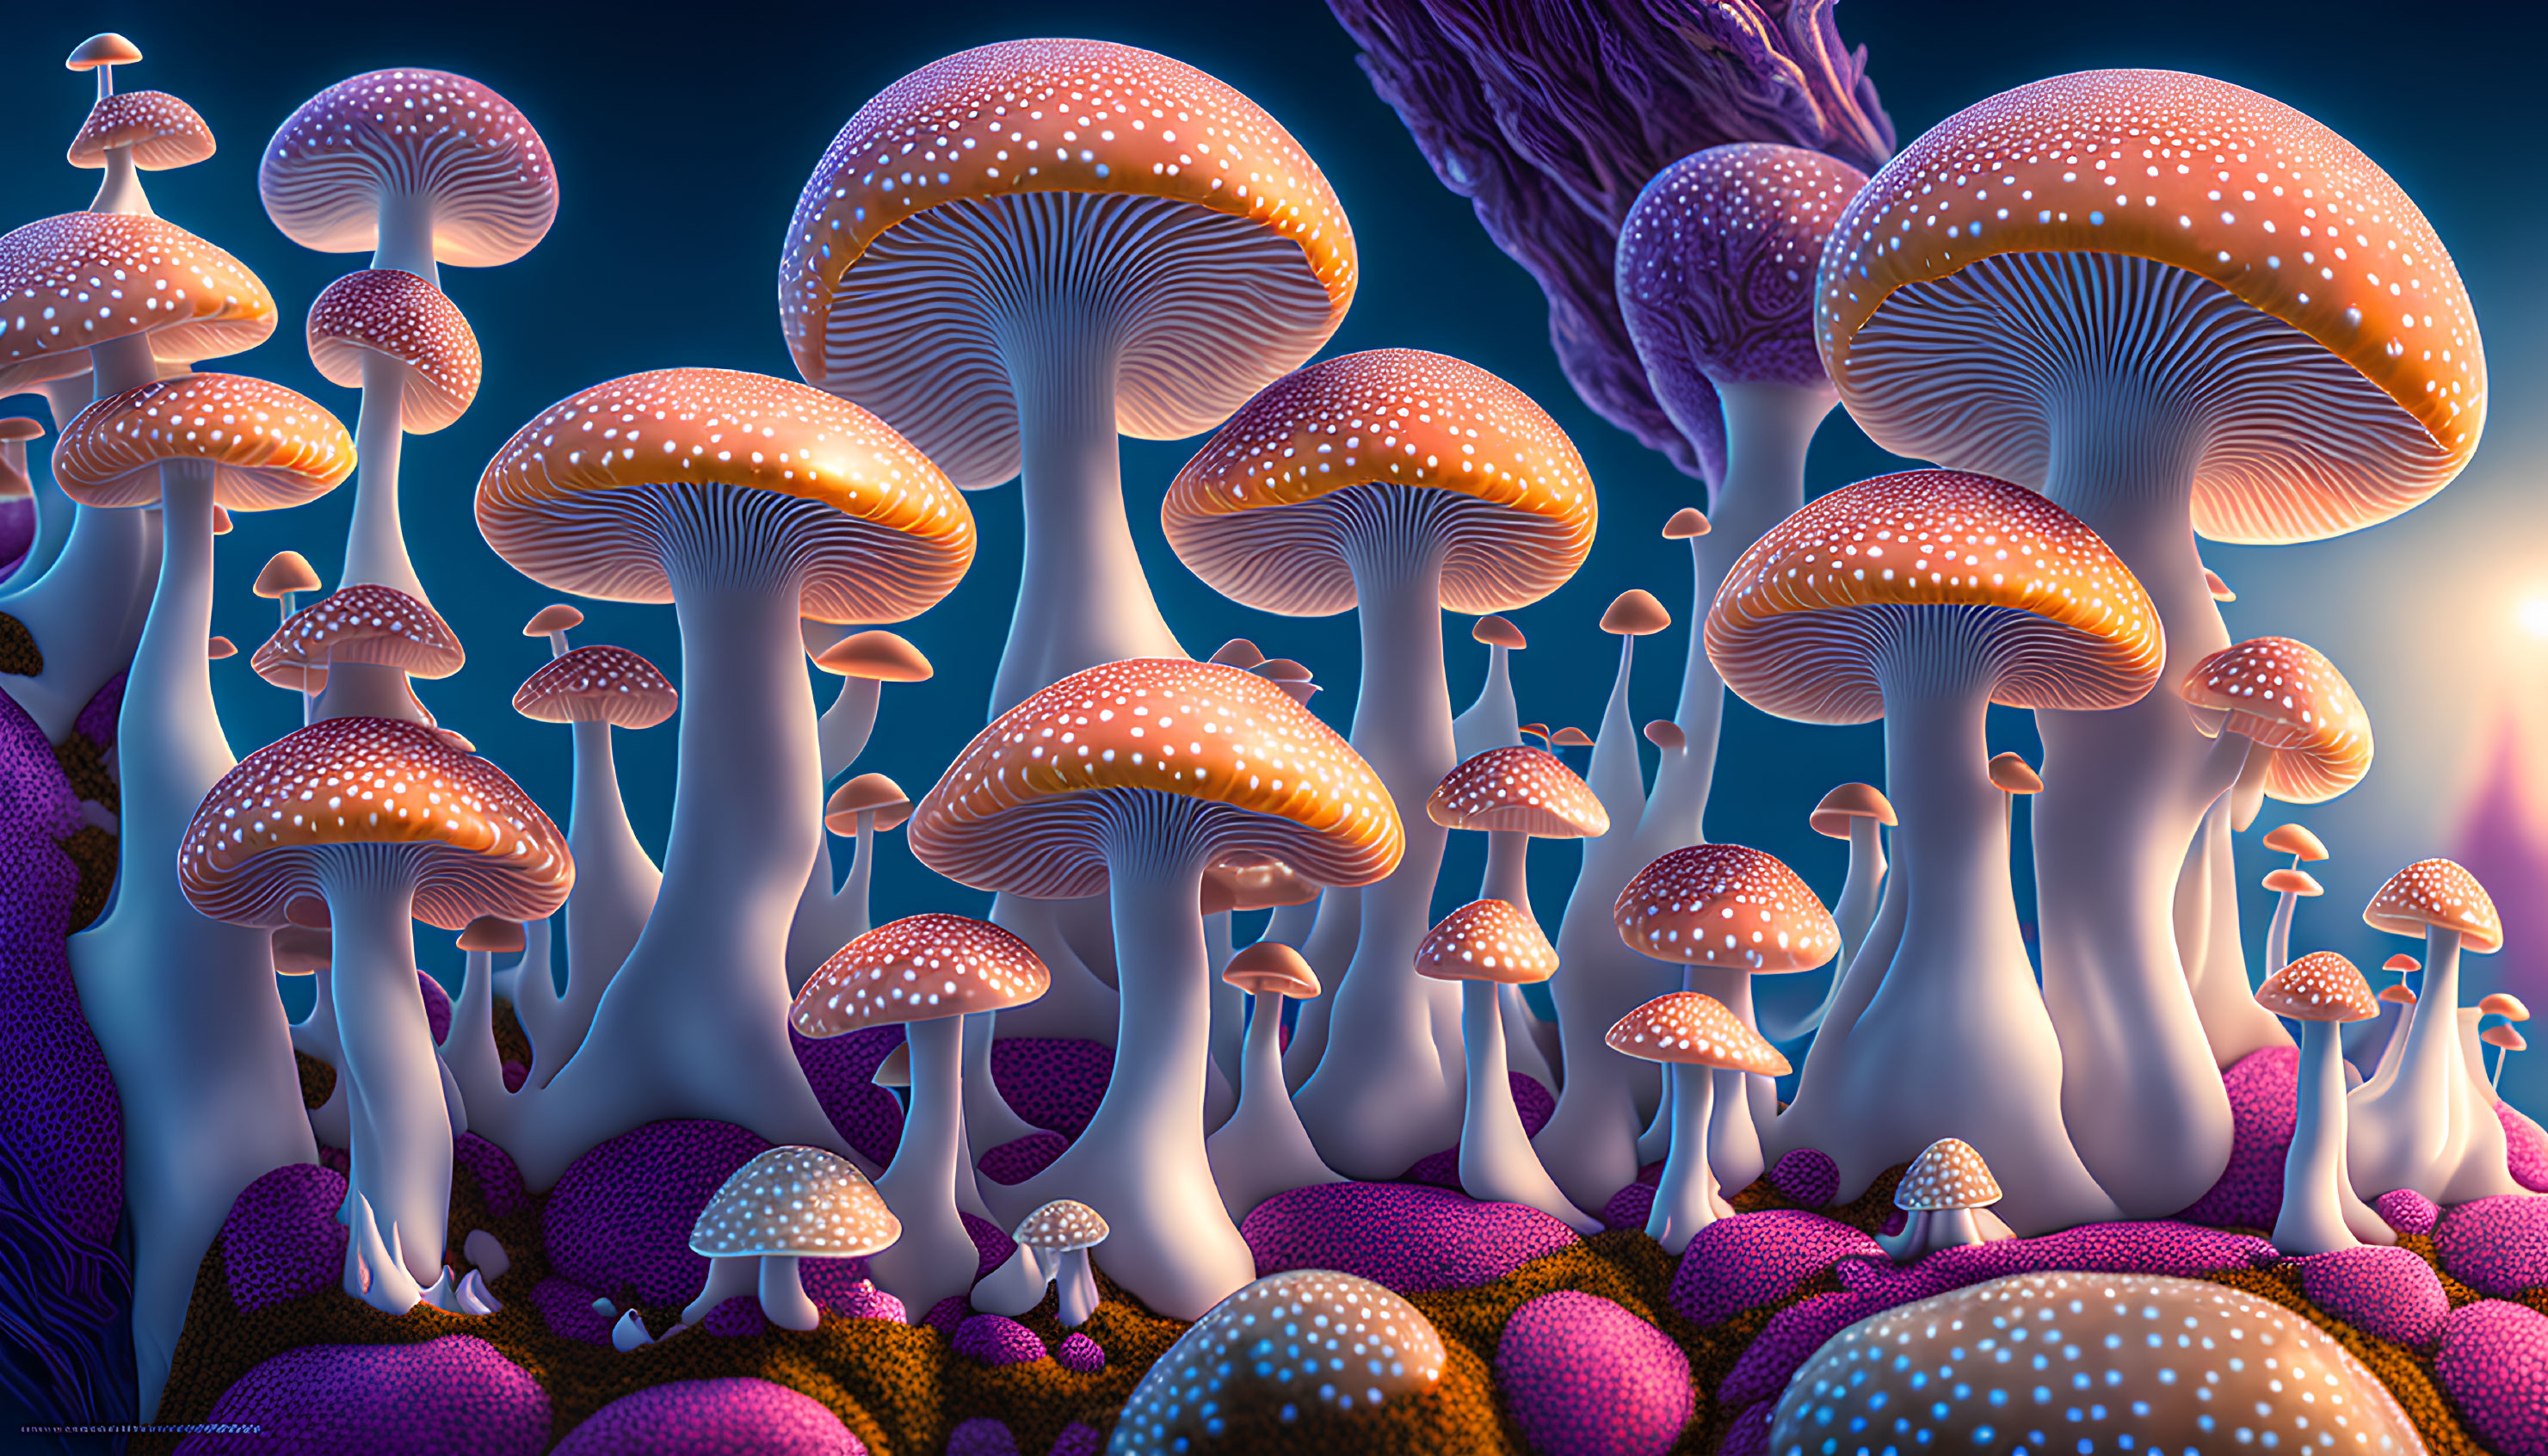 Fantasy landscape with oversized luminescent mushrooms against starry sky